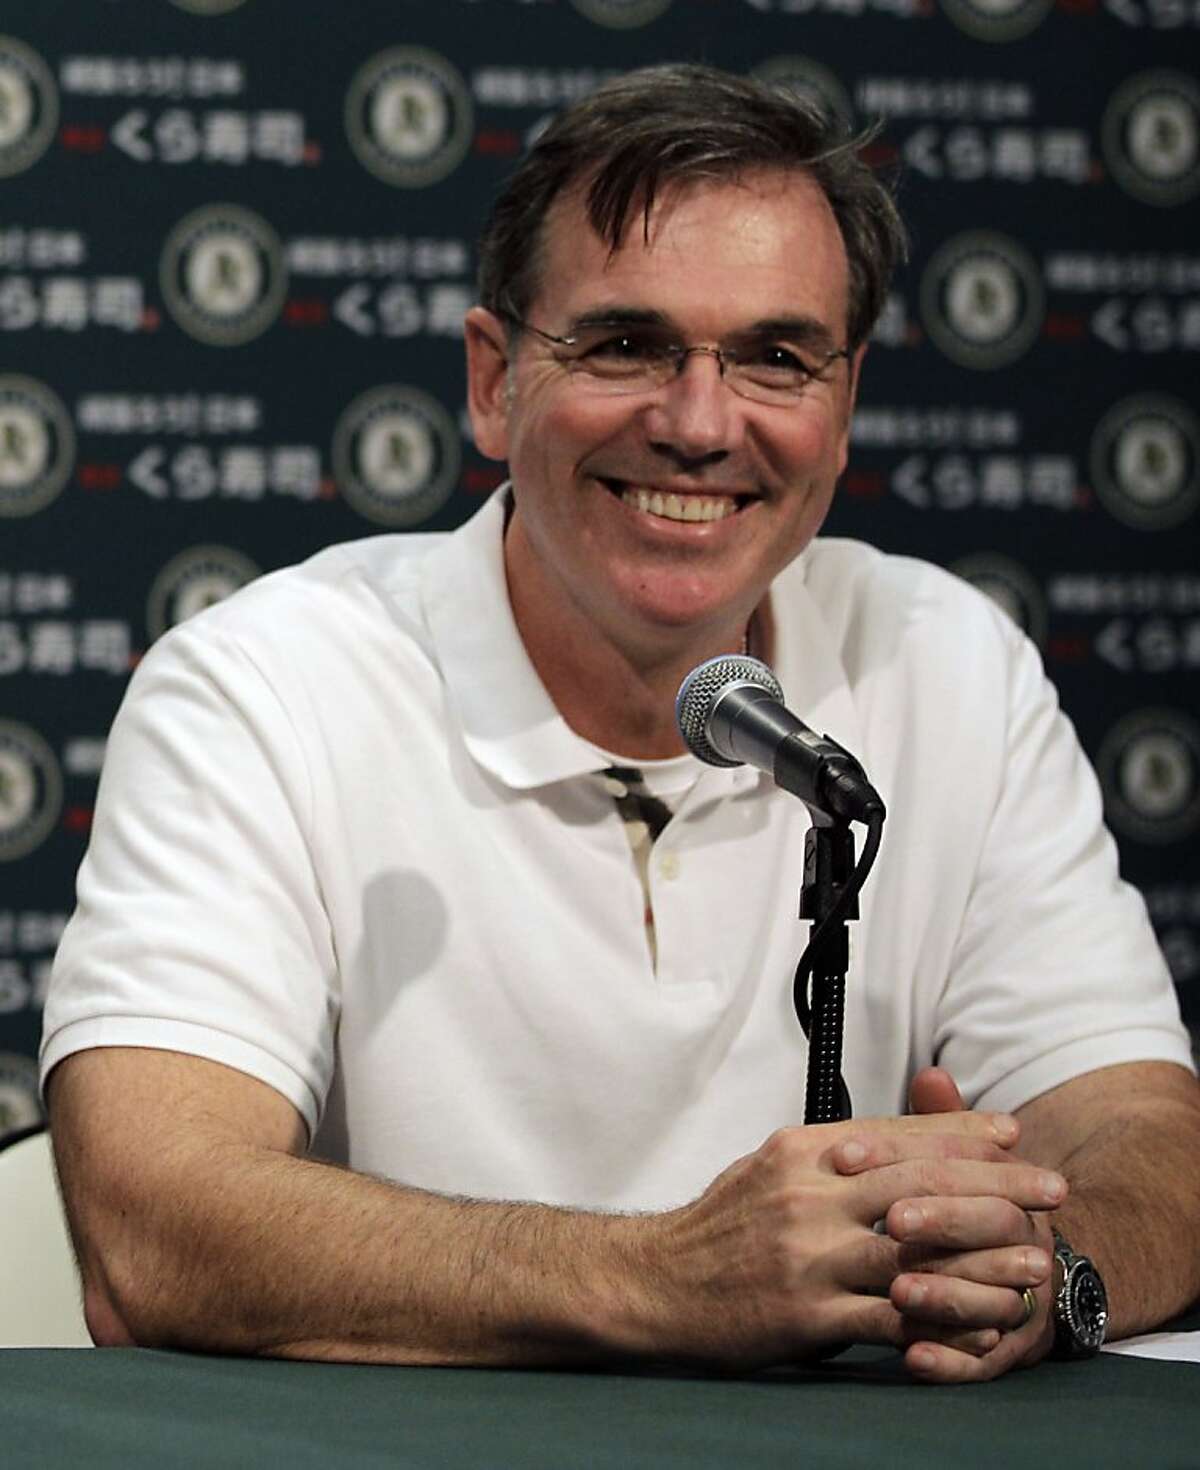 Oakland Athletics general manager Billy Beane smiles during a media conference Wednesday, Sept. 21, 2011, in Oakland, Calif. The Oakland Athletics have reached agreement on a three-year contract to keep Bob Melvin as their permanent manager. The 49-year-old Melvin took over in an interim capacity for the fired Bob Geren in June and has a 42-49 record after Tuesday night's 7-2 loss to the AL West-leading Texas Rangers at the Coliseum. Geren's dismissal marked the first time Oakland fired a manager during the season in a quarter century.